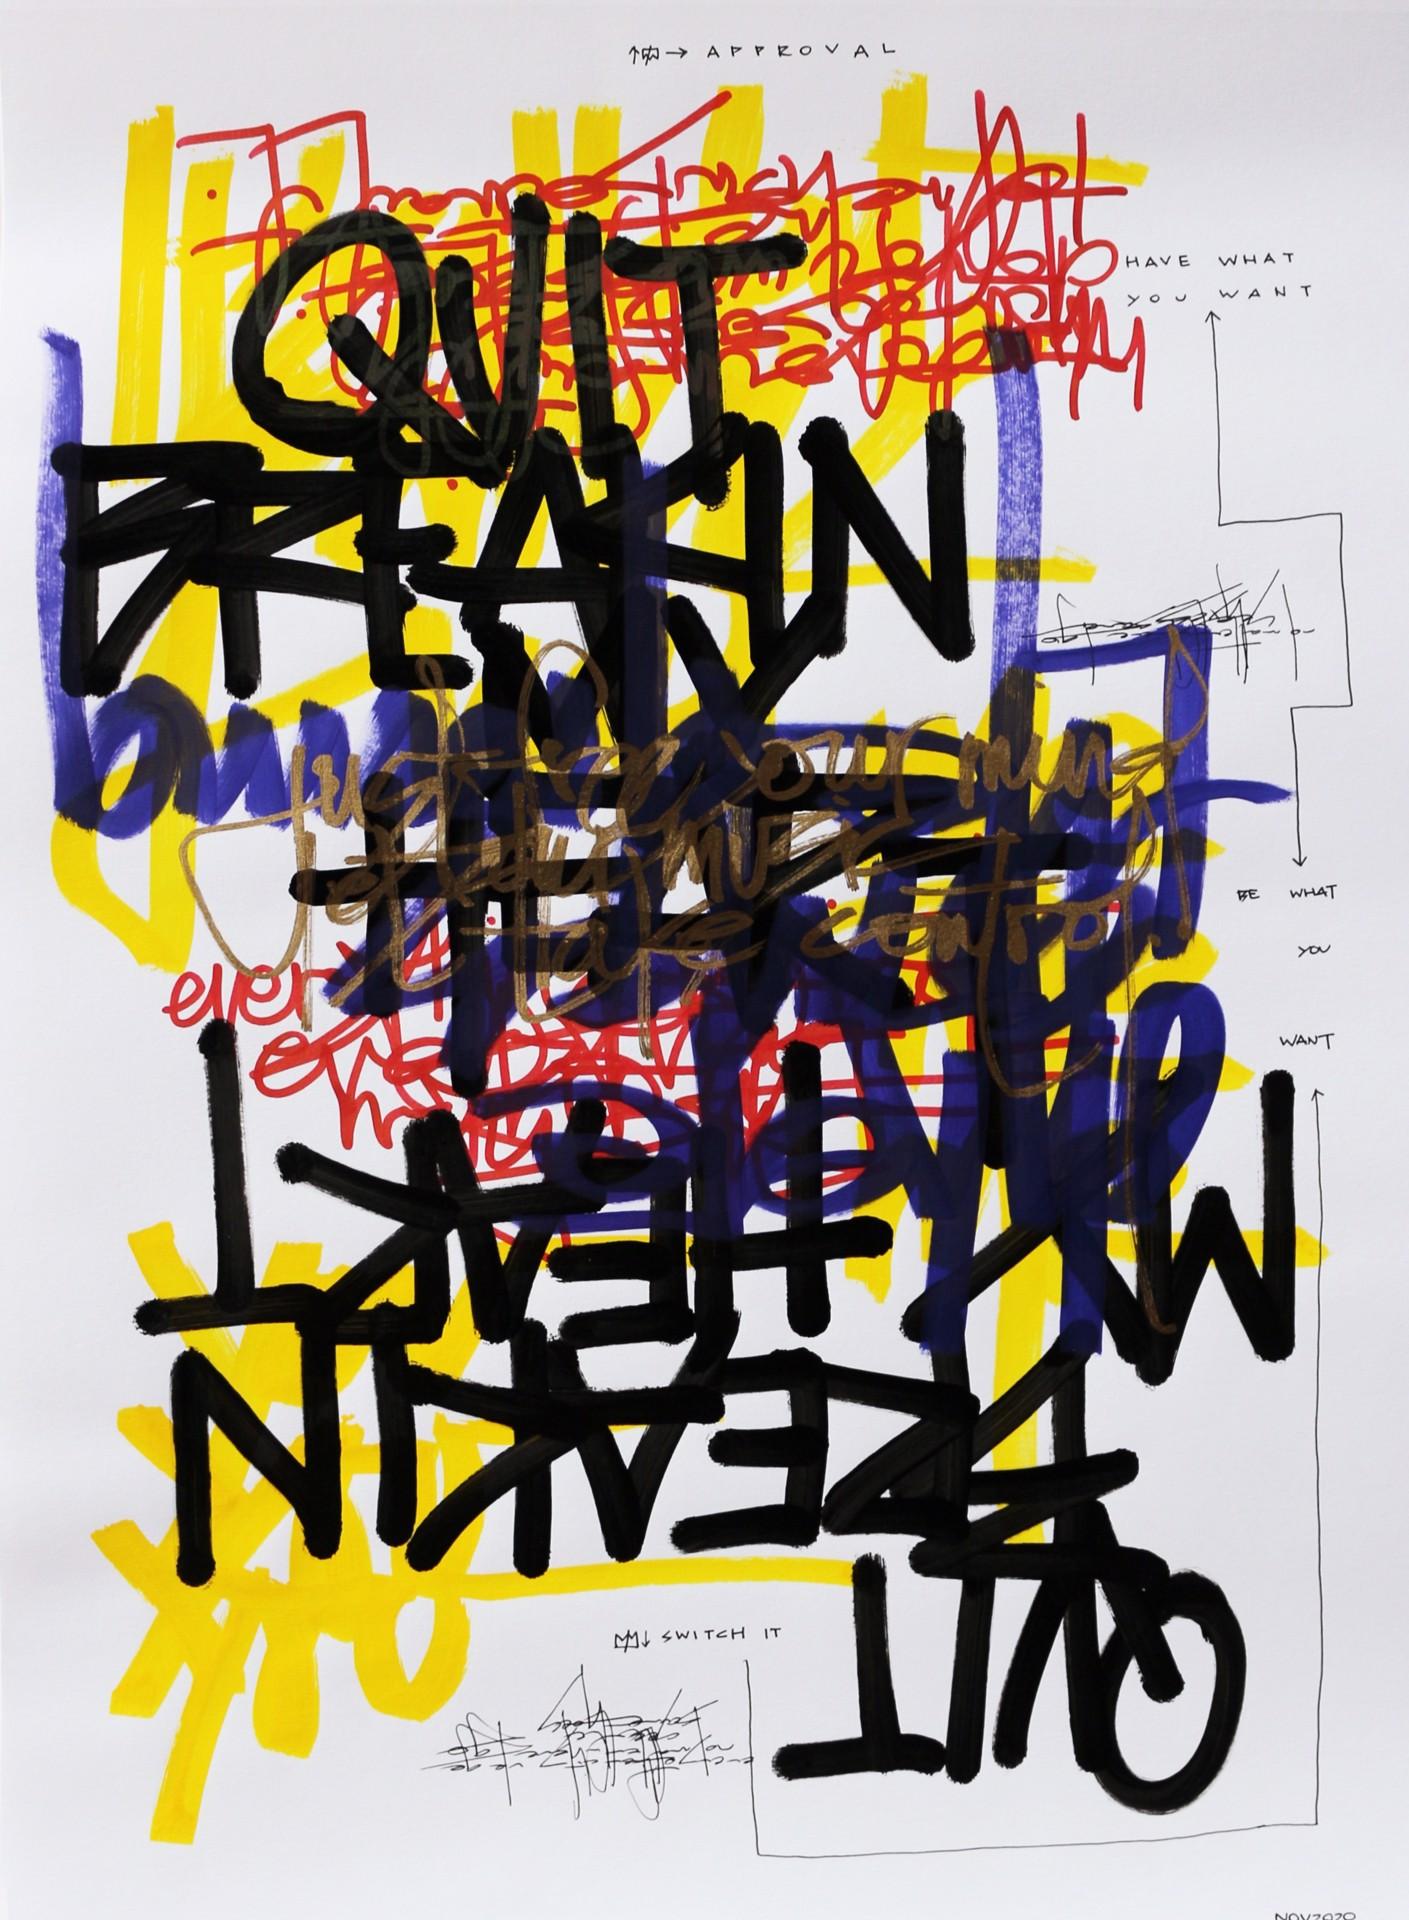 Carla Aaron Lopez Abstract Drawing - Mint Condition- Primary Colors Graphic Text, Marker, Pen & Pencil on Paper